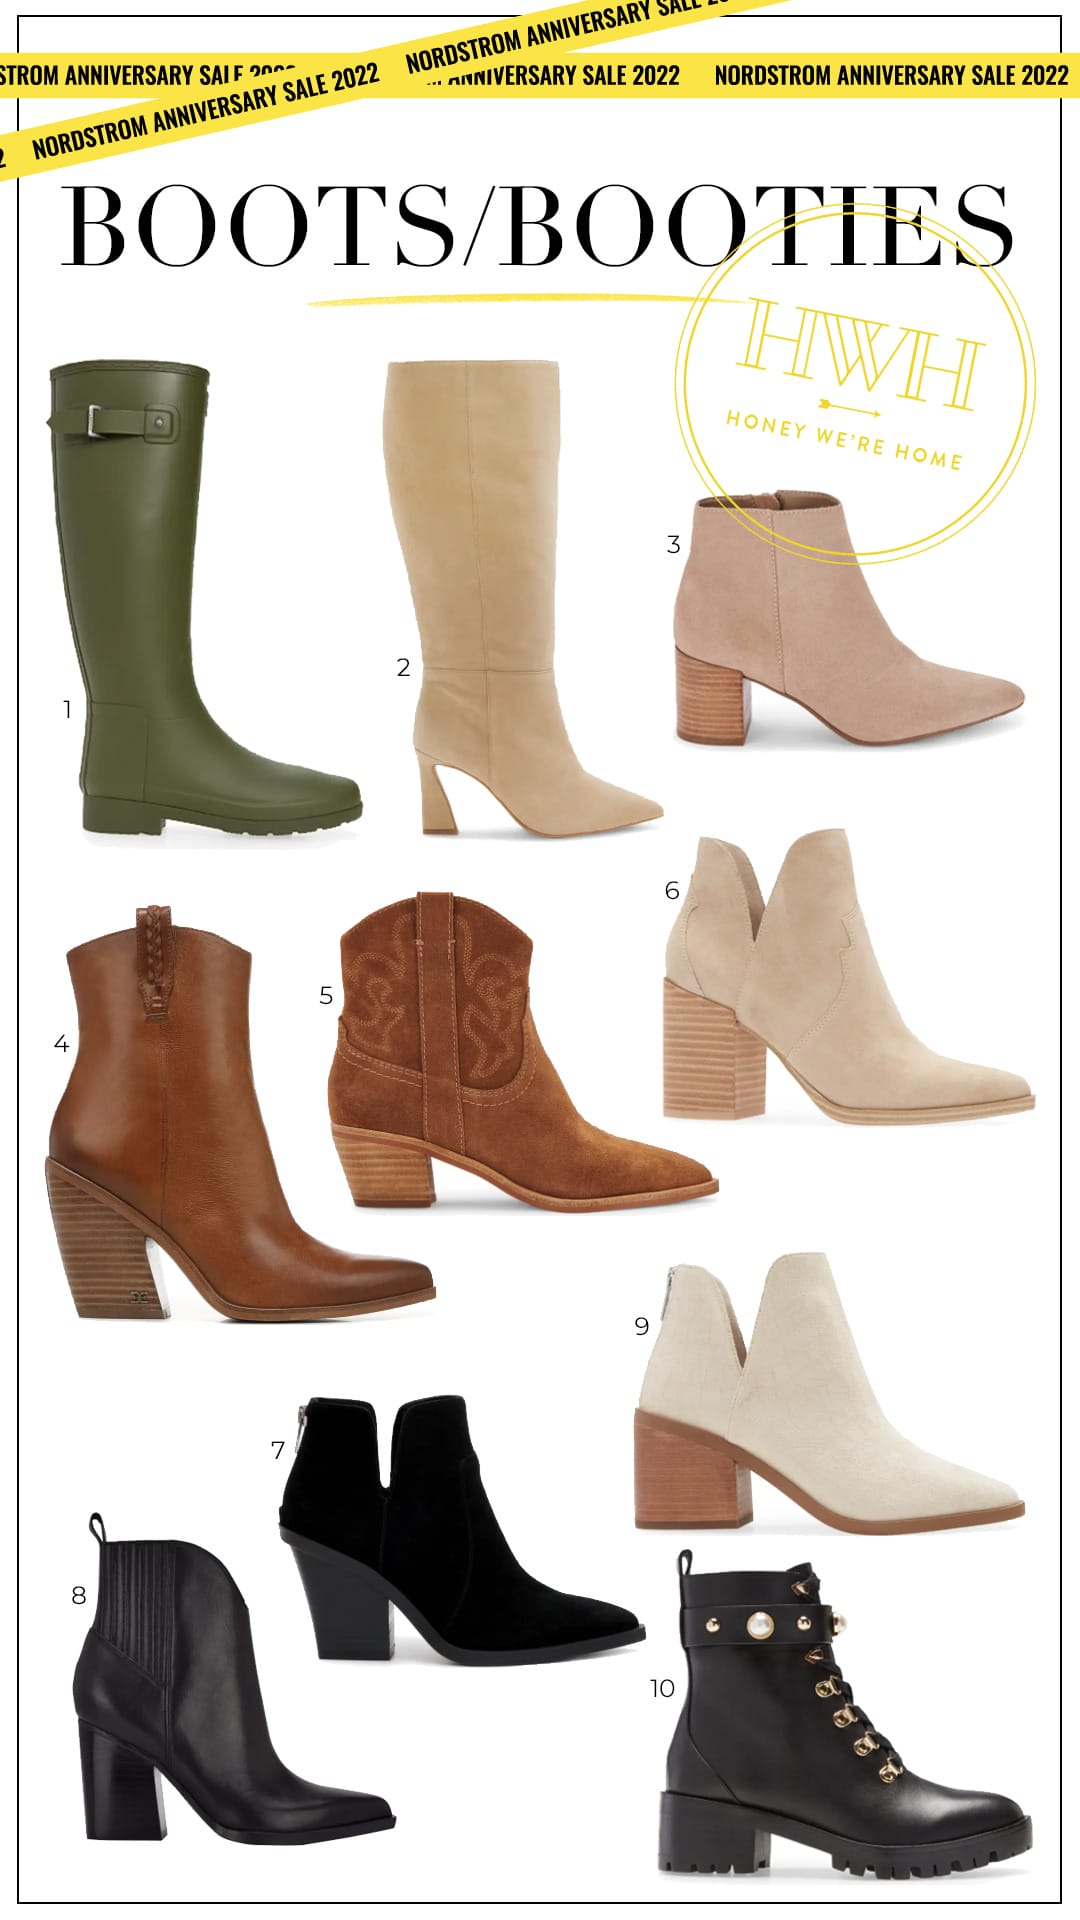 Nordstrom Anniversary Sale 2022 Boots and booties